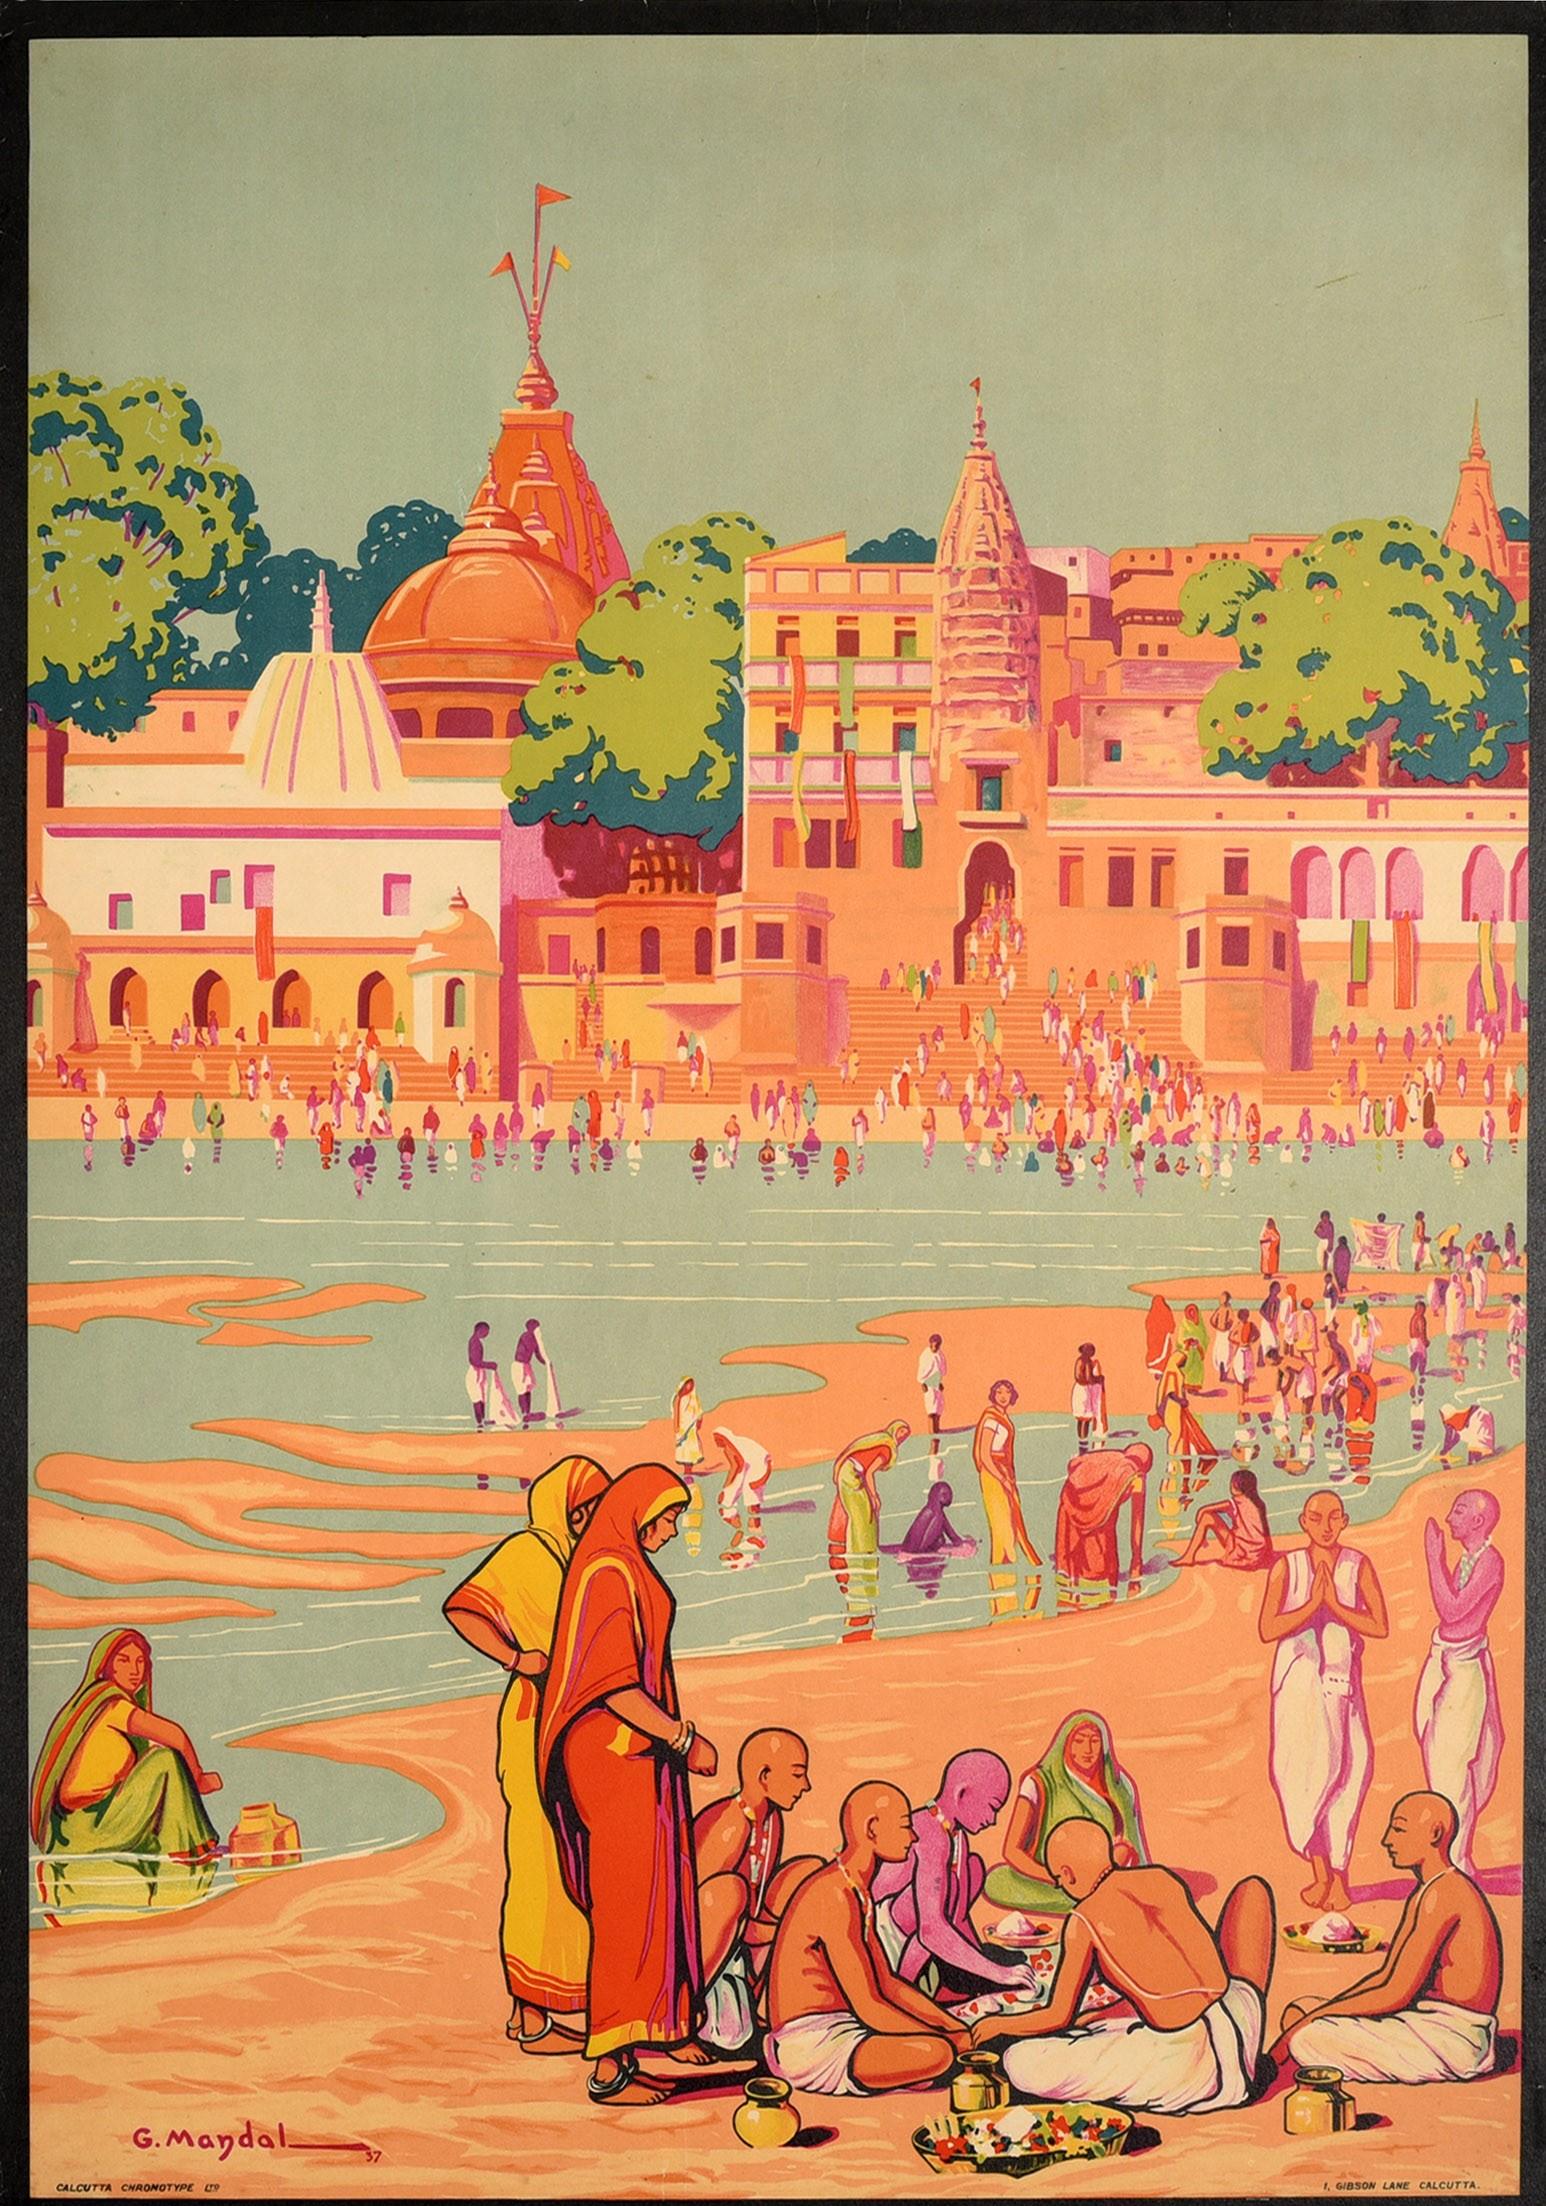 Indian Original Vintage Asia Travel Poster For Gaya India Ft. Scenic Temple River View For Sale